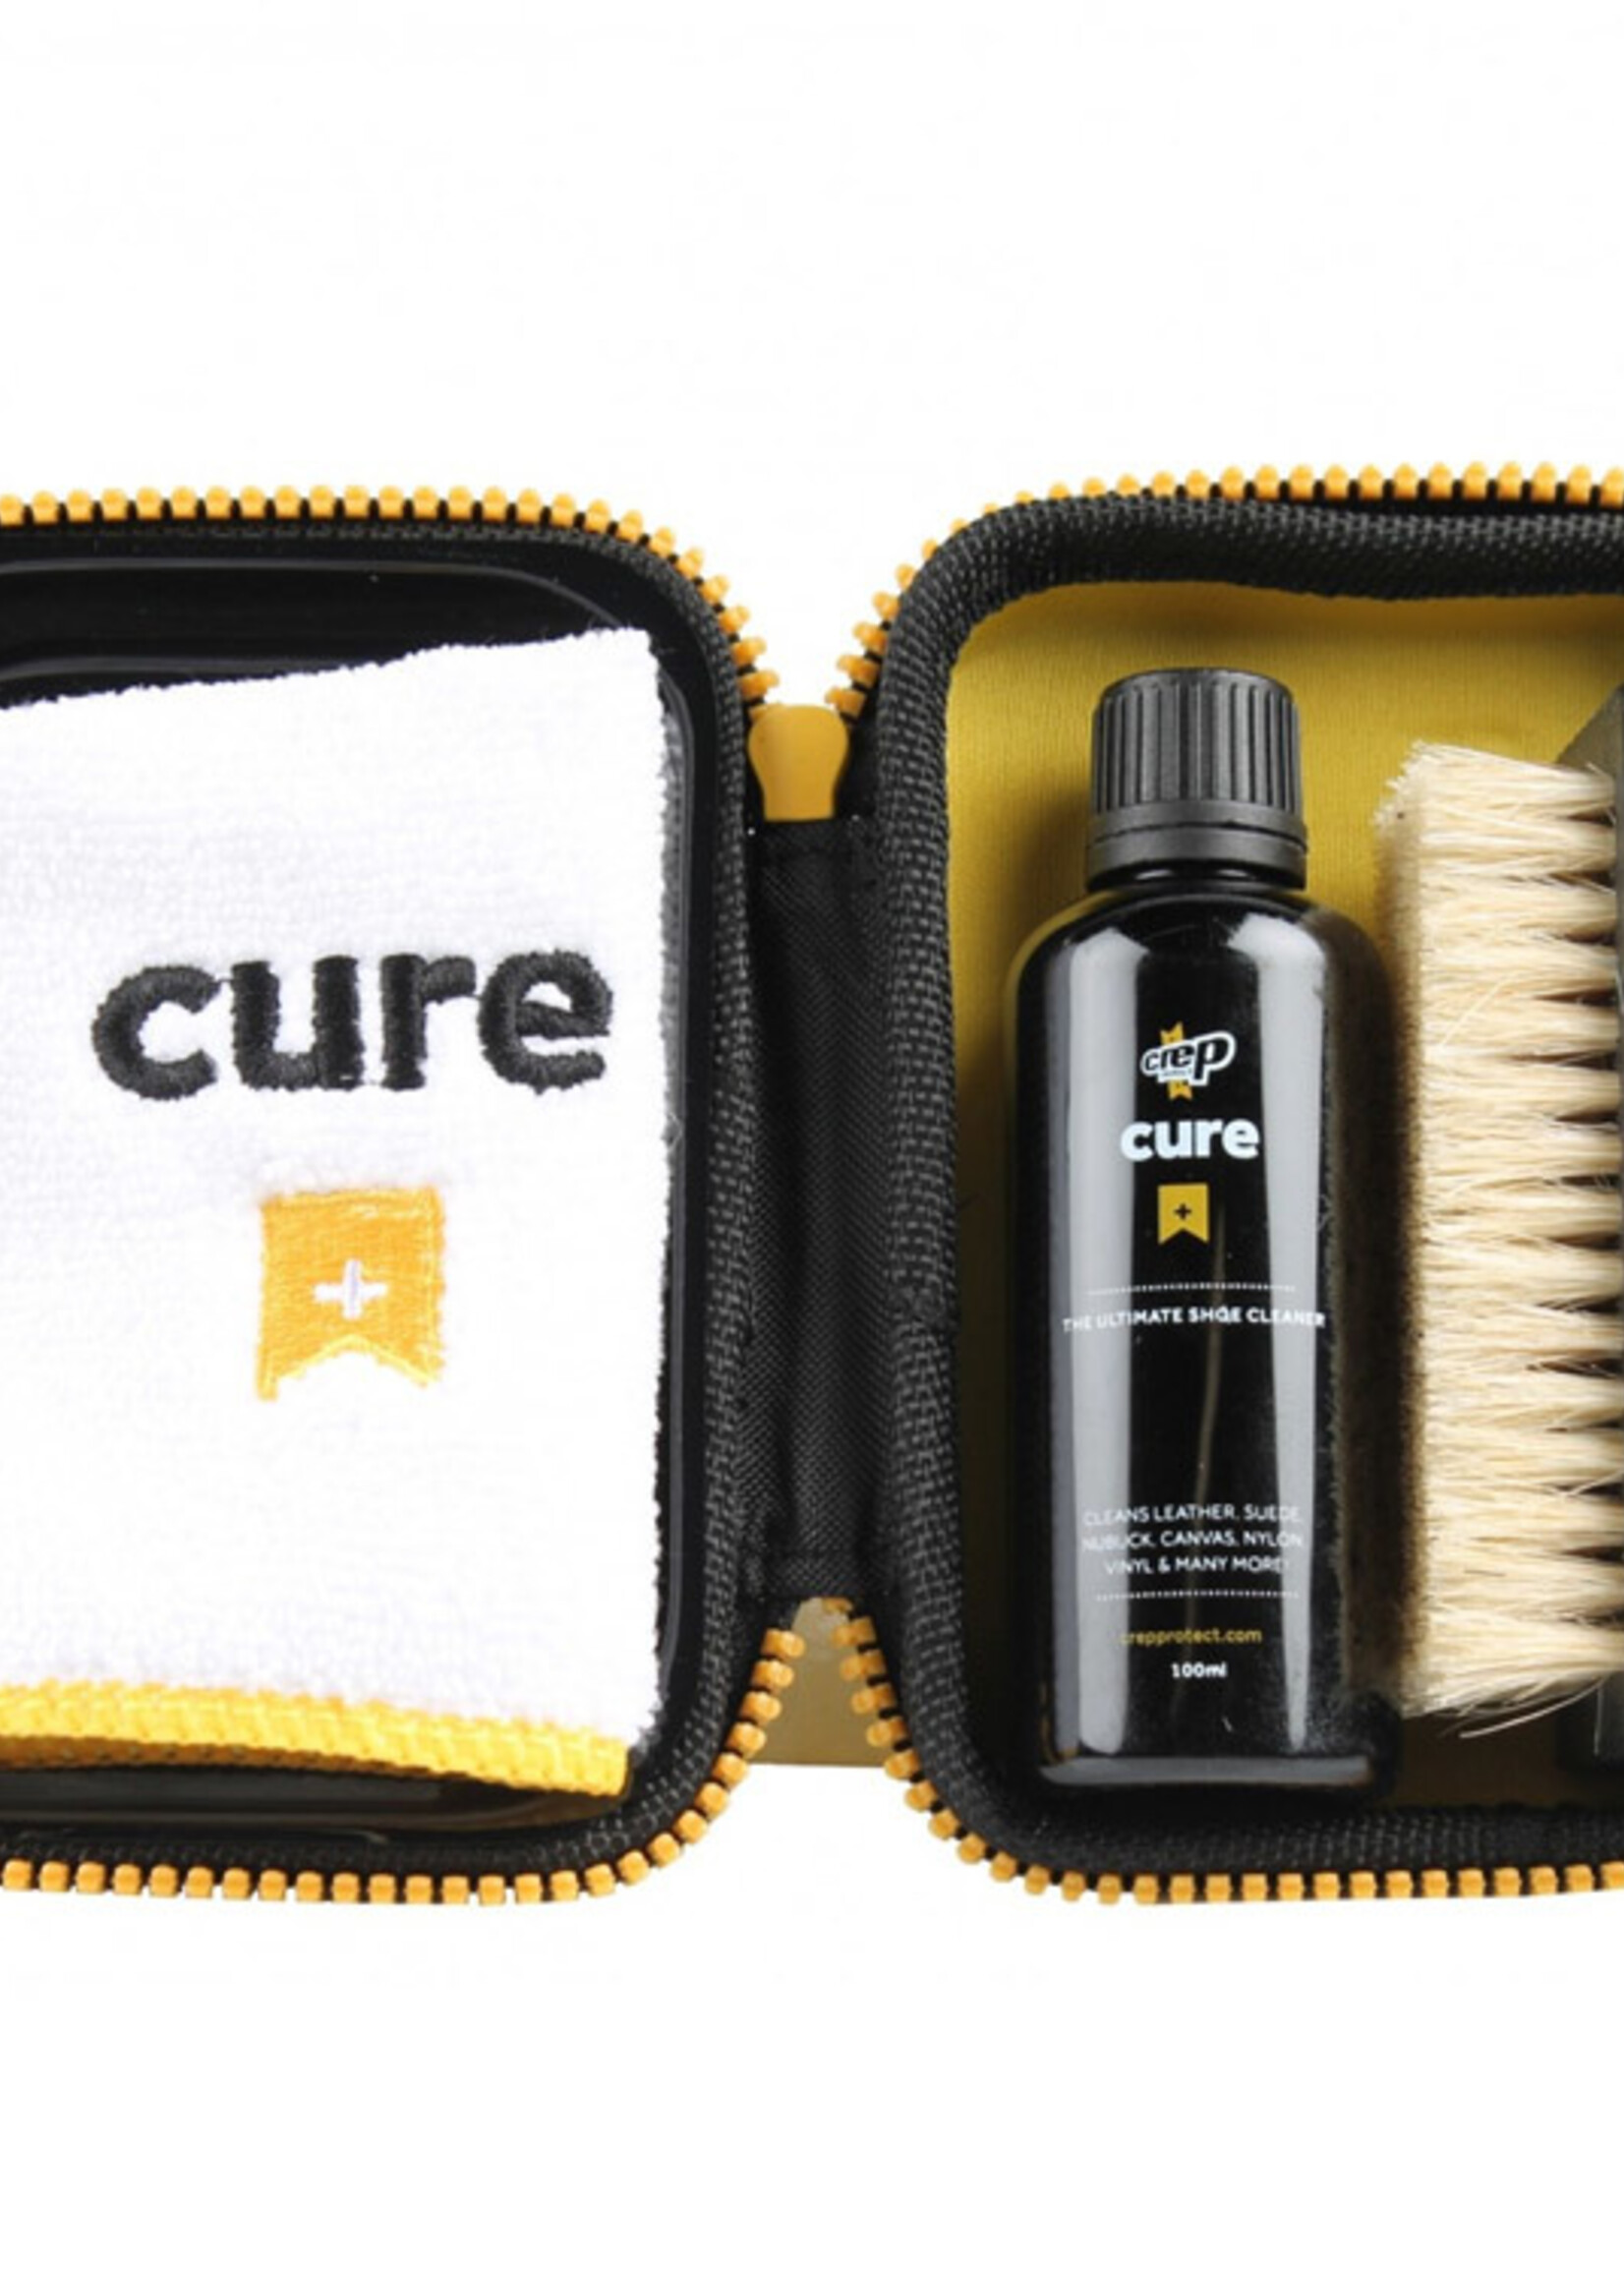 Crep Protect Crep Protect The Ultimate Shoe Cleaner Cure Kit